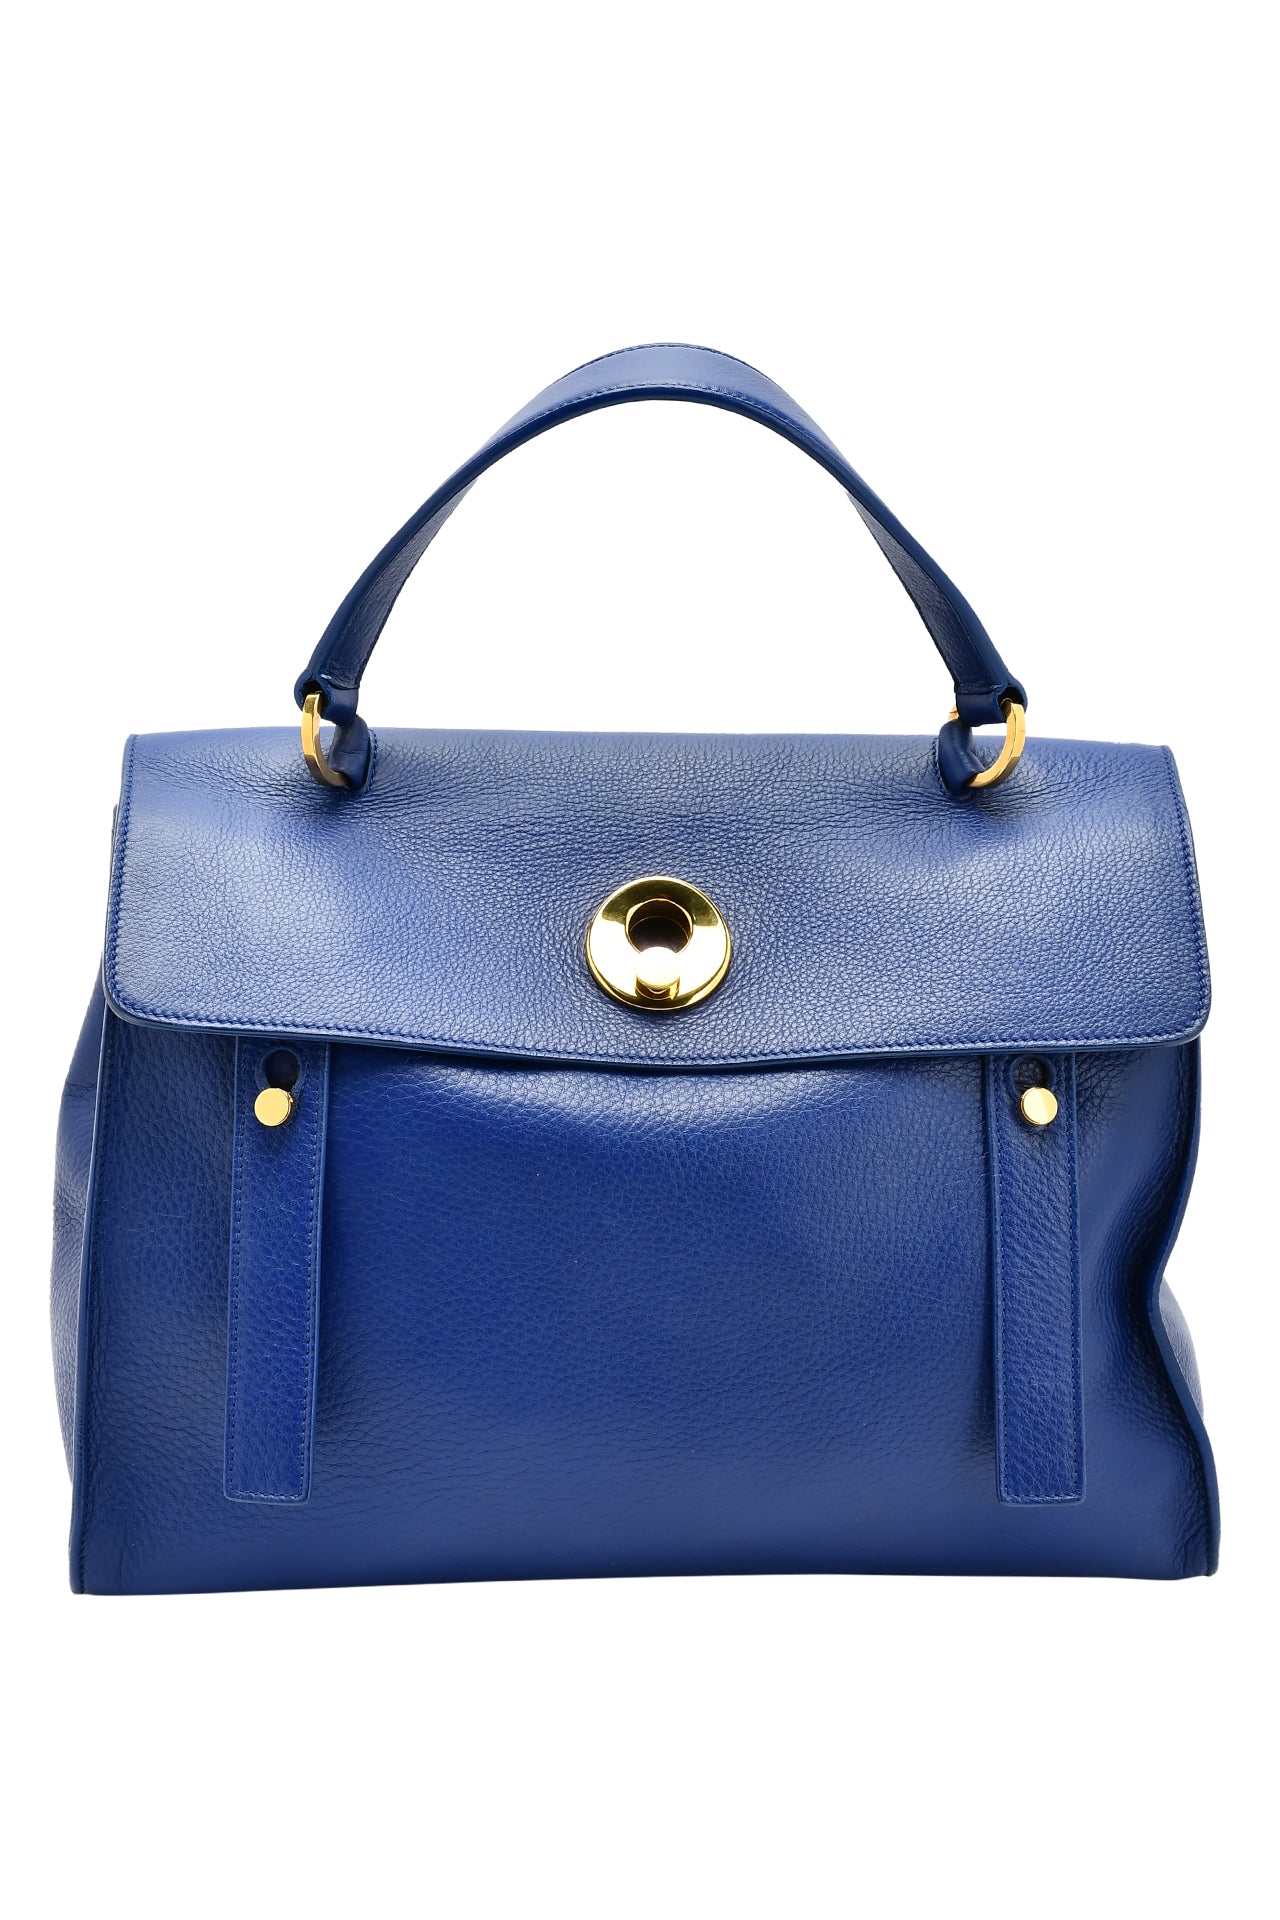 Muse two leather handbag Yves Saint Laurent Blue in Leather - 19056827